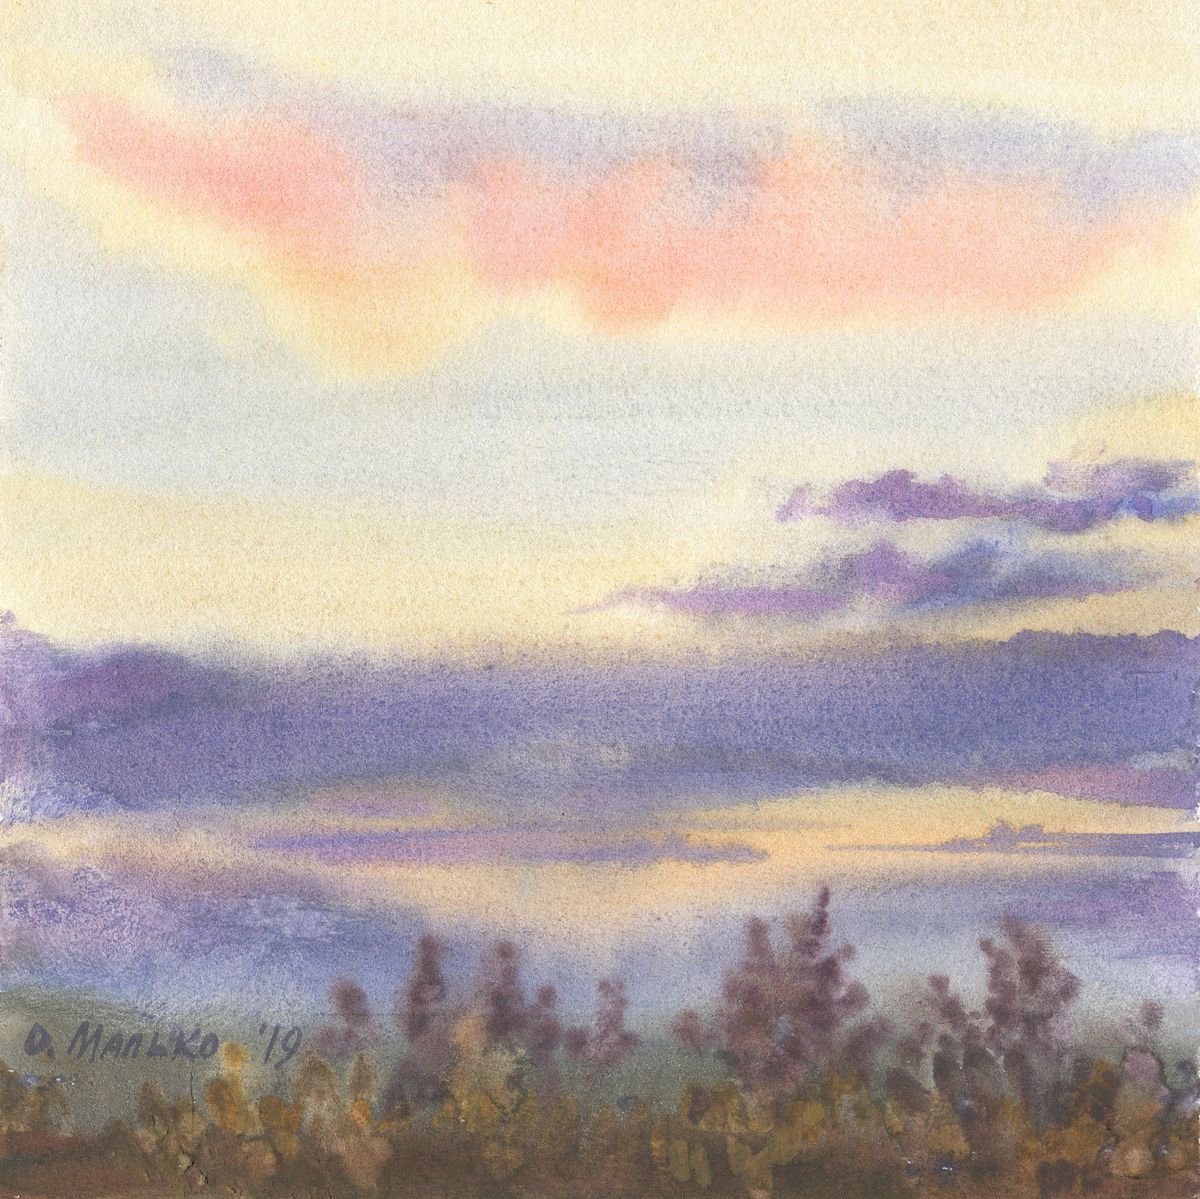 Sky 1 / Evening sky Watercolor skyscape by Olha Malko